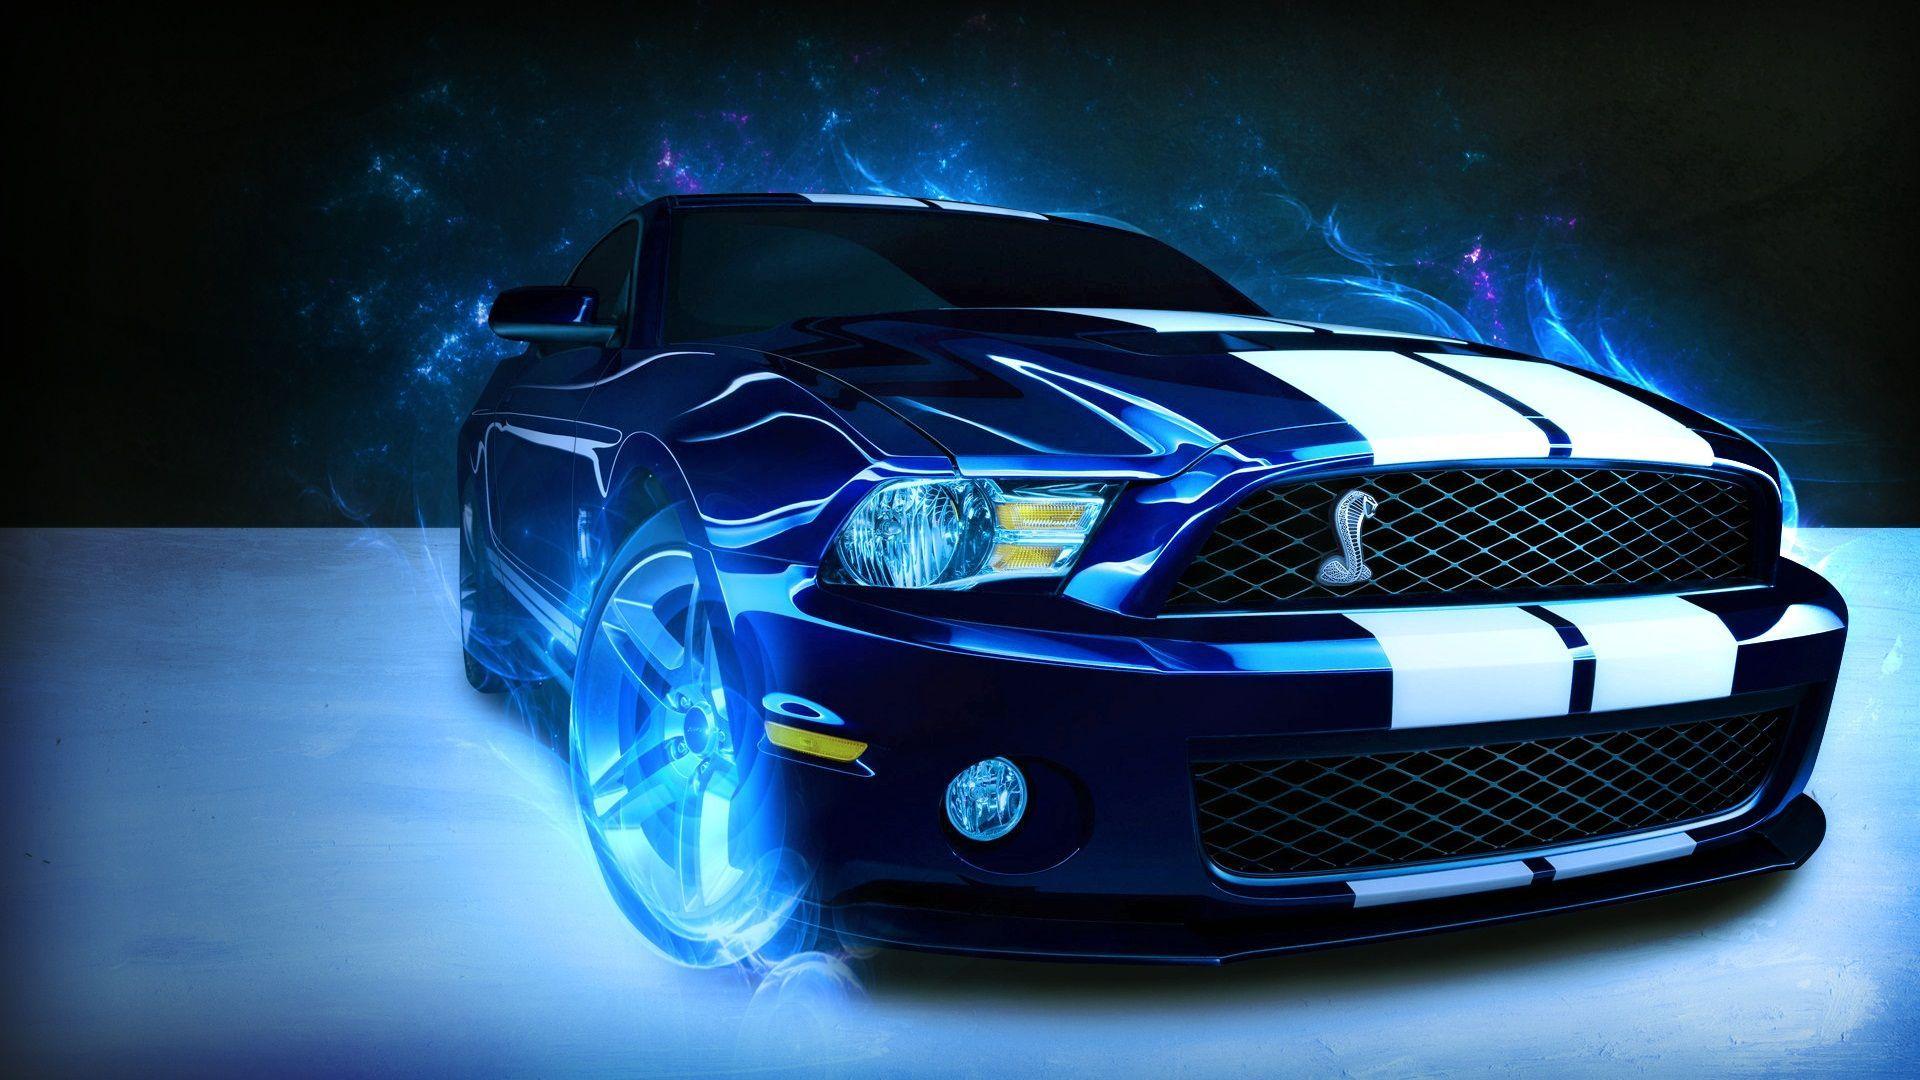 Blue Ford Mustang Wallpapers Top Free Blue Ford Mustang Backgrounds Wallpaperaccess